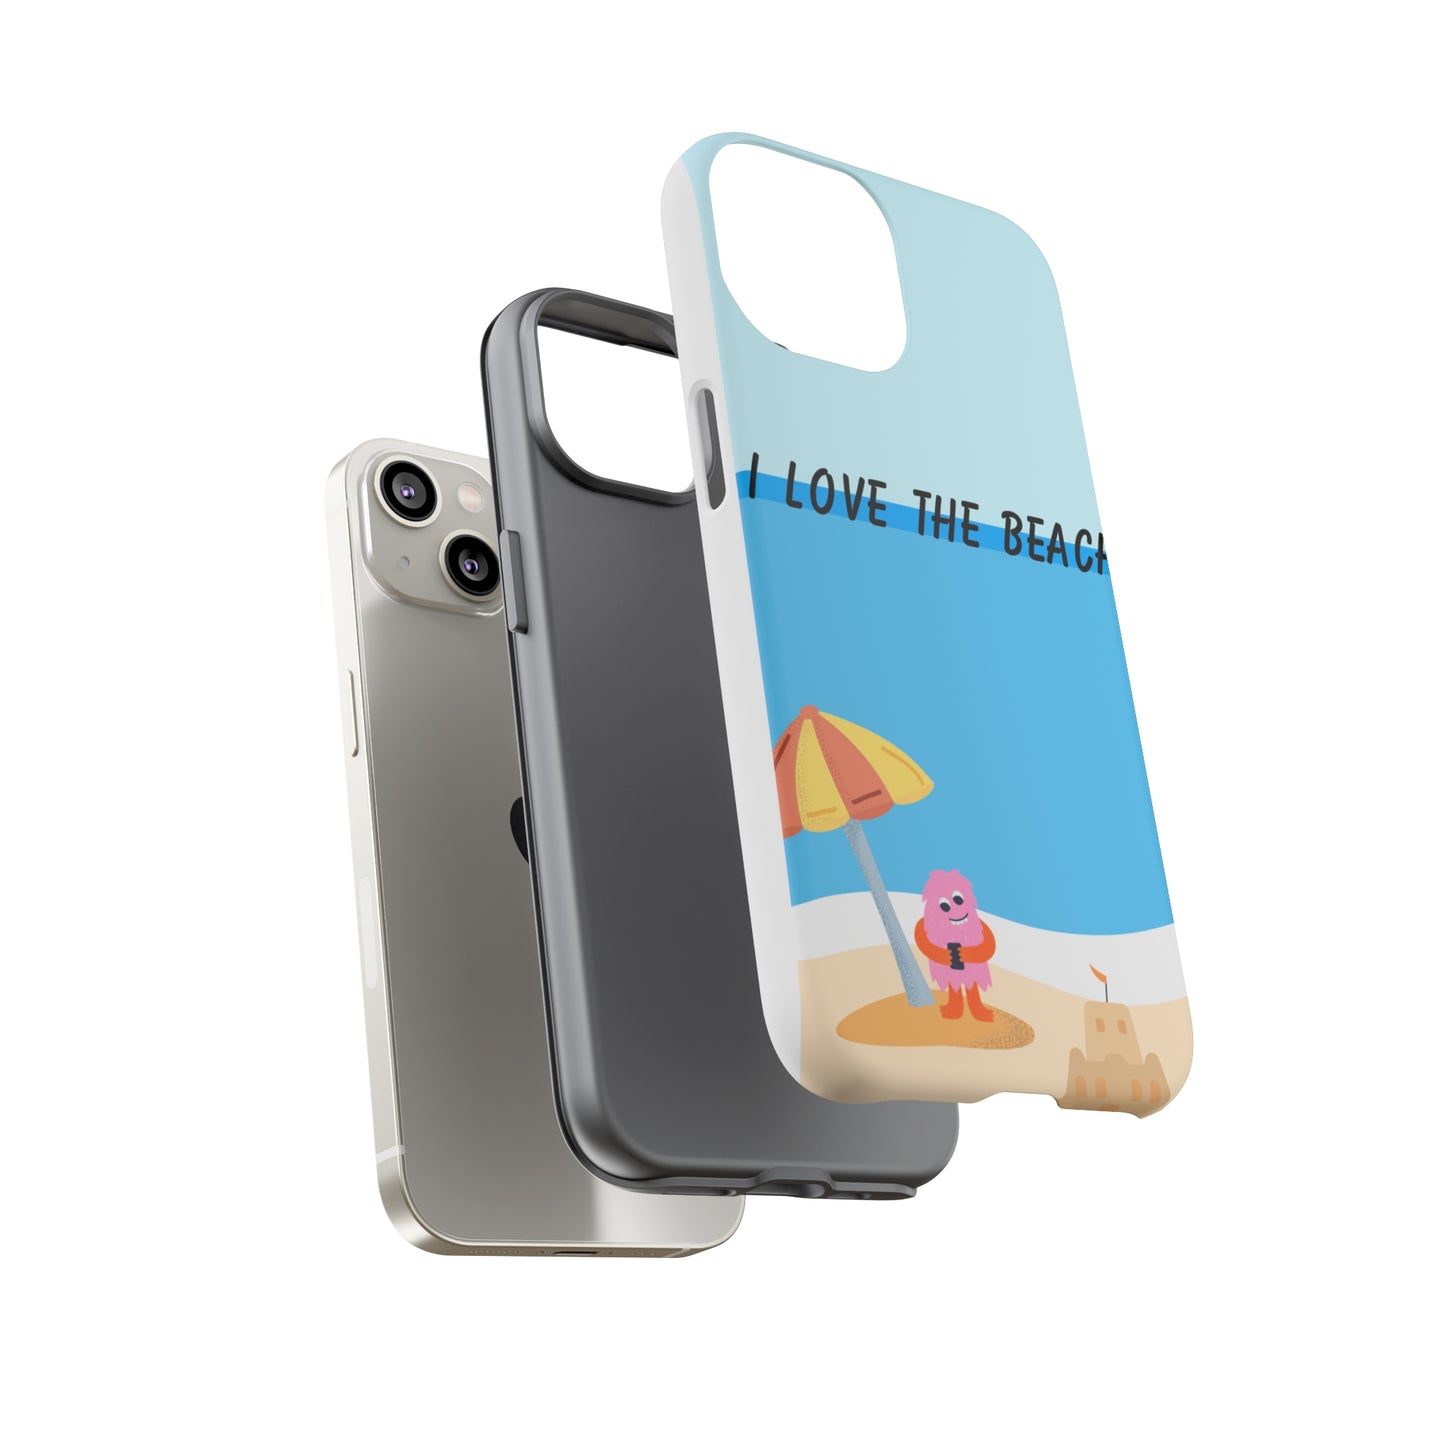 "Design your style: Personalized cases for iPhones